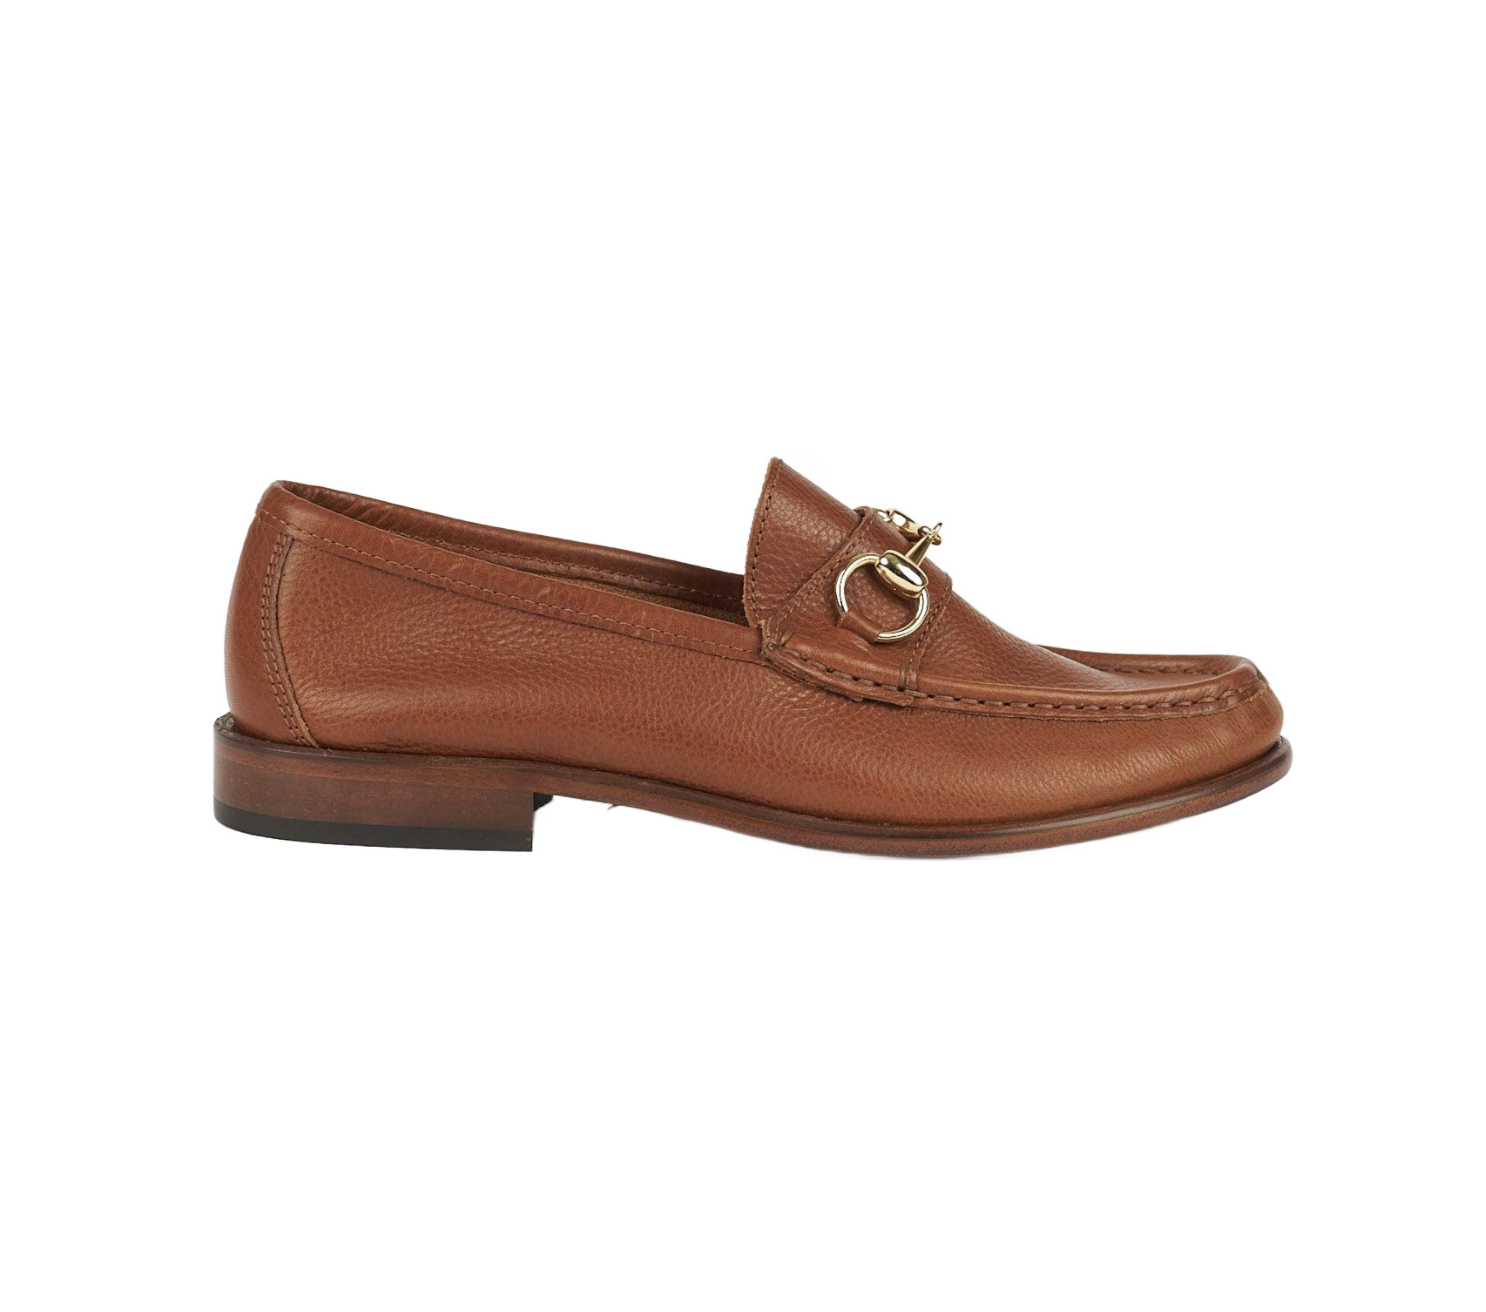 The Bit Loafer in Cognac